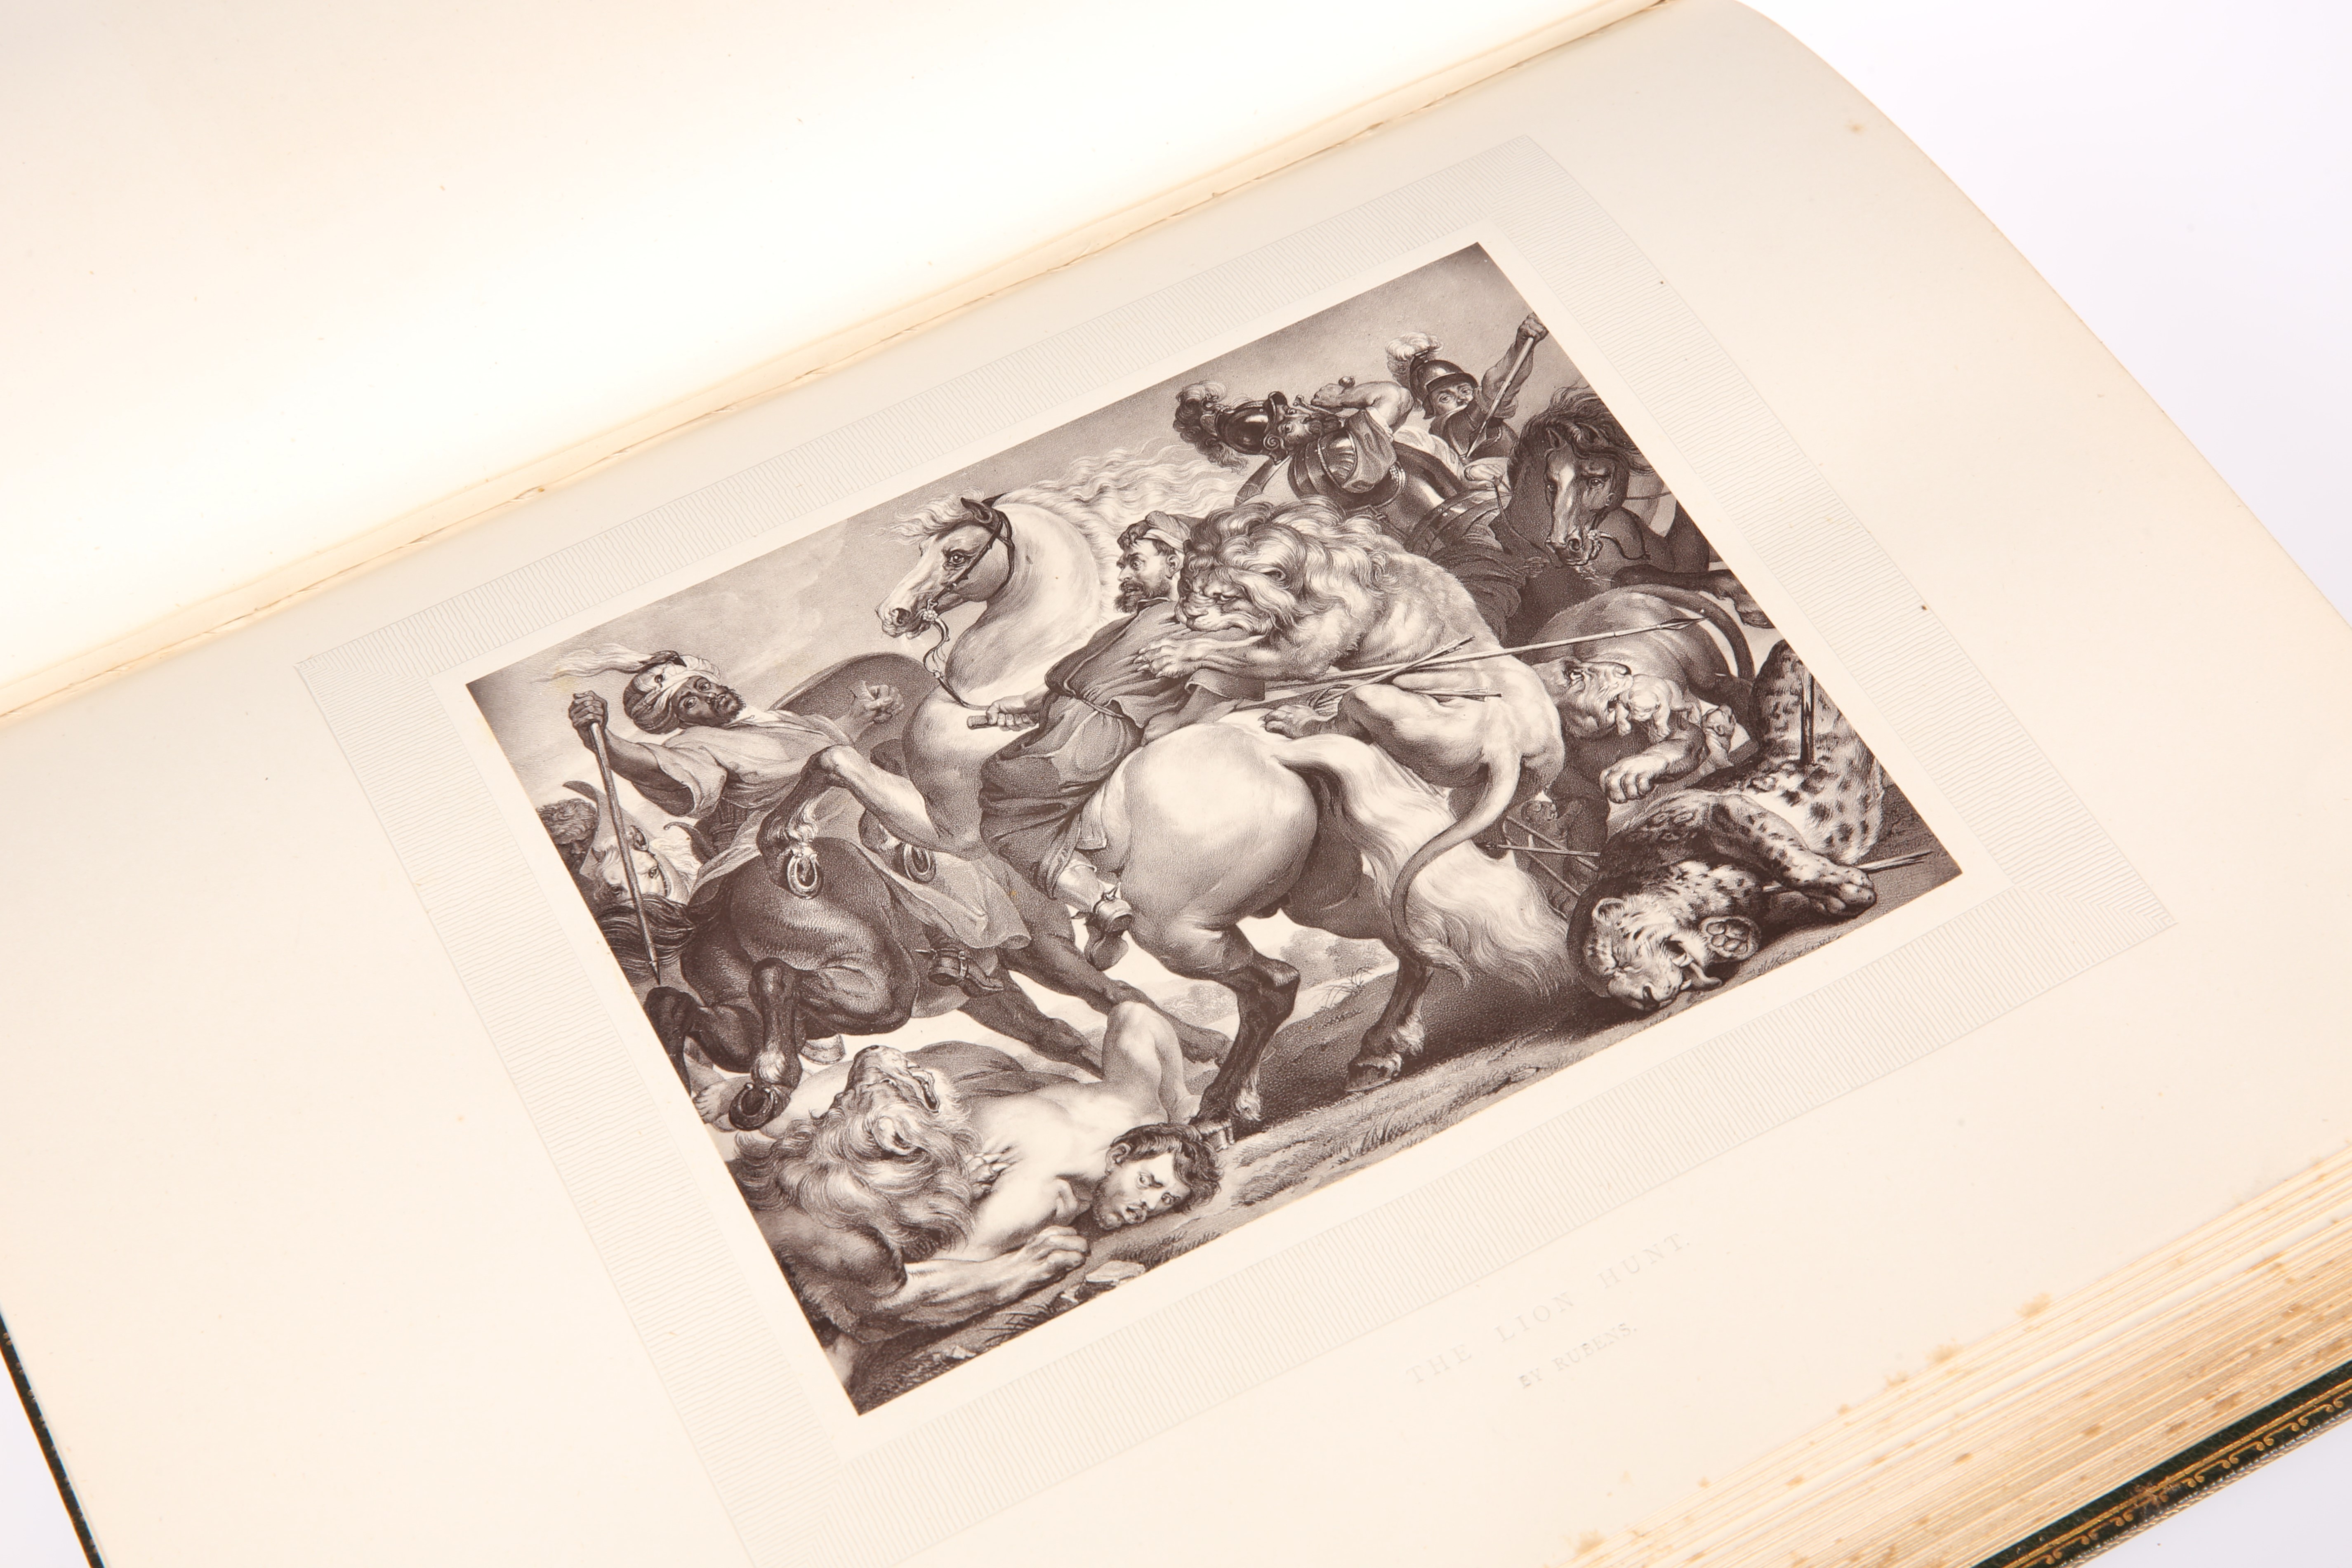 DRESDEN GALLERY, finely bound by Bickers, 1873. - Image 2 of 2